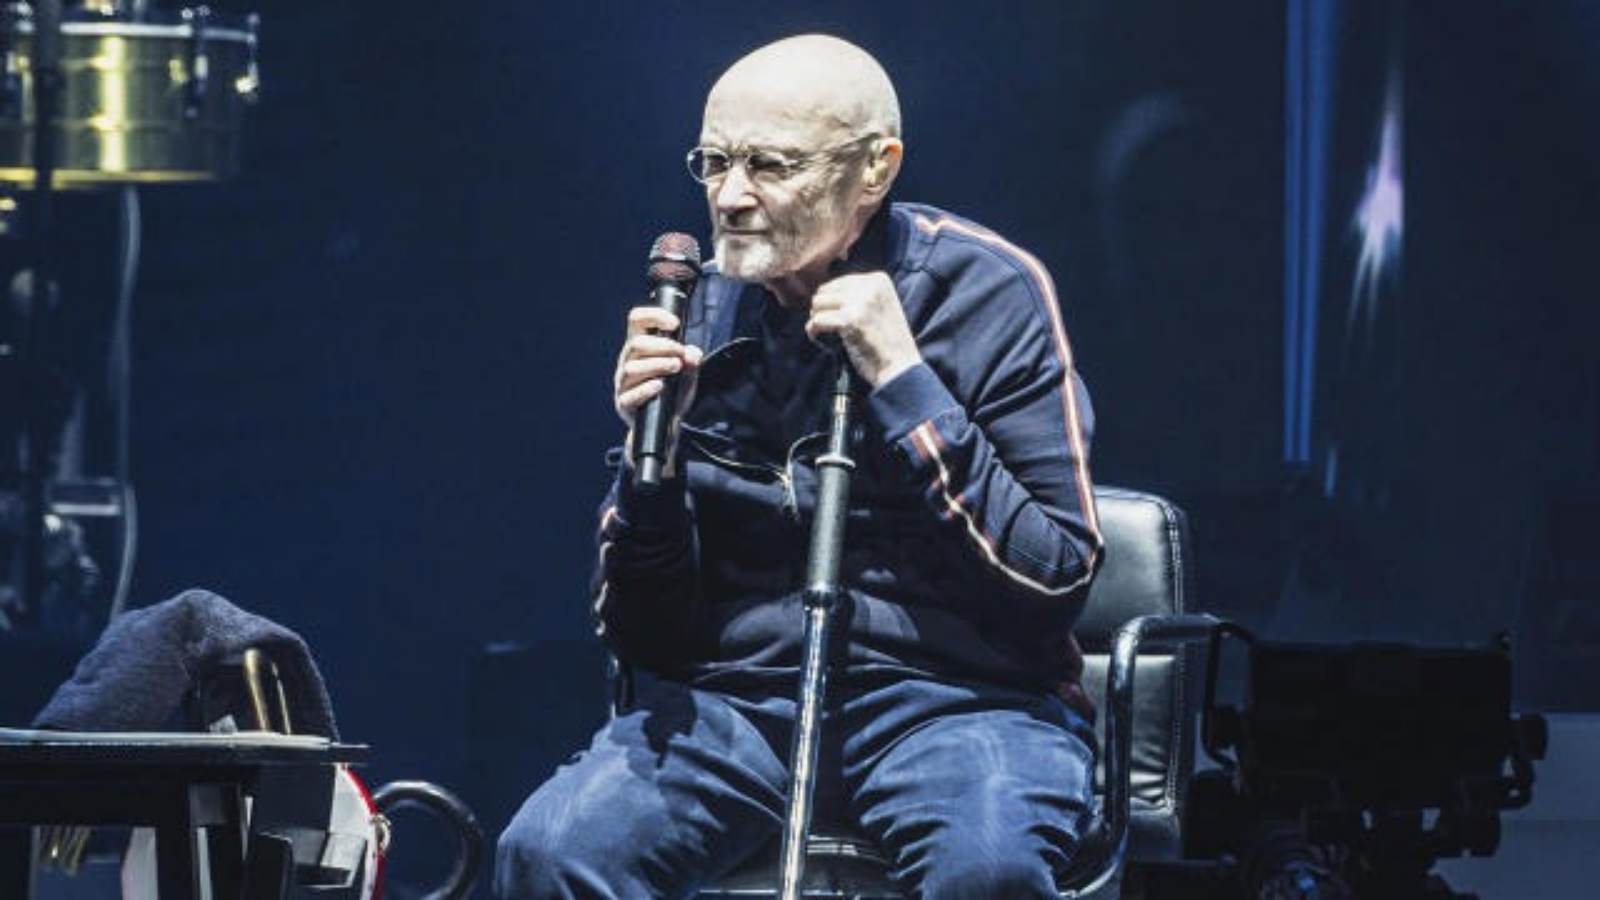 Phil Collins Bids Farewell To Fans; Performs Last Show With Genesis